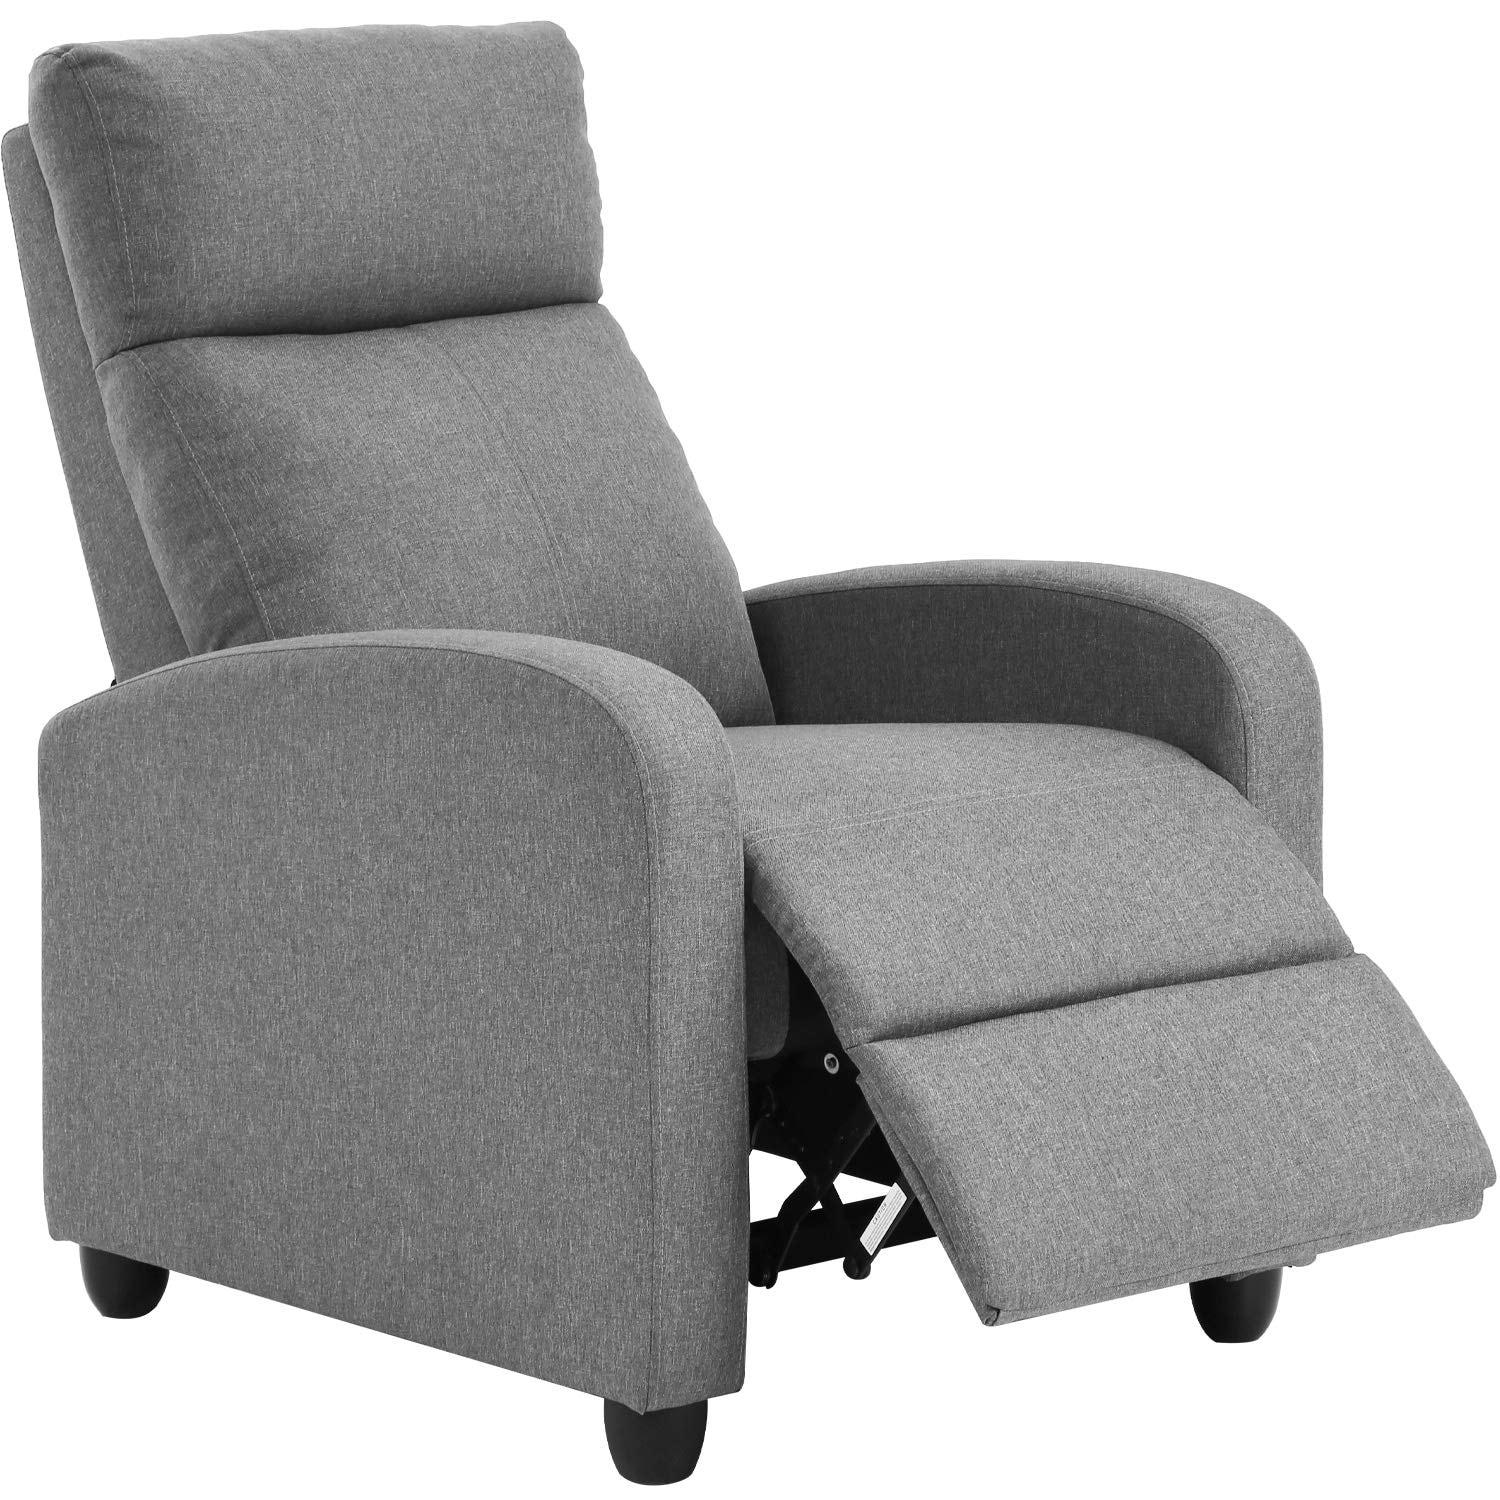 Recliner Chair For Living Room Home Theater Seating Single Reclining Sofa Lounge With Padded Seat Backrest